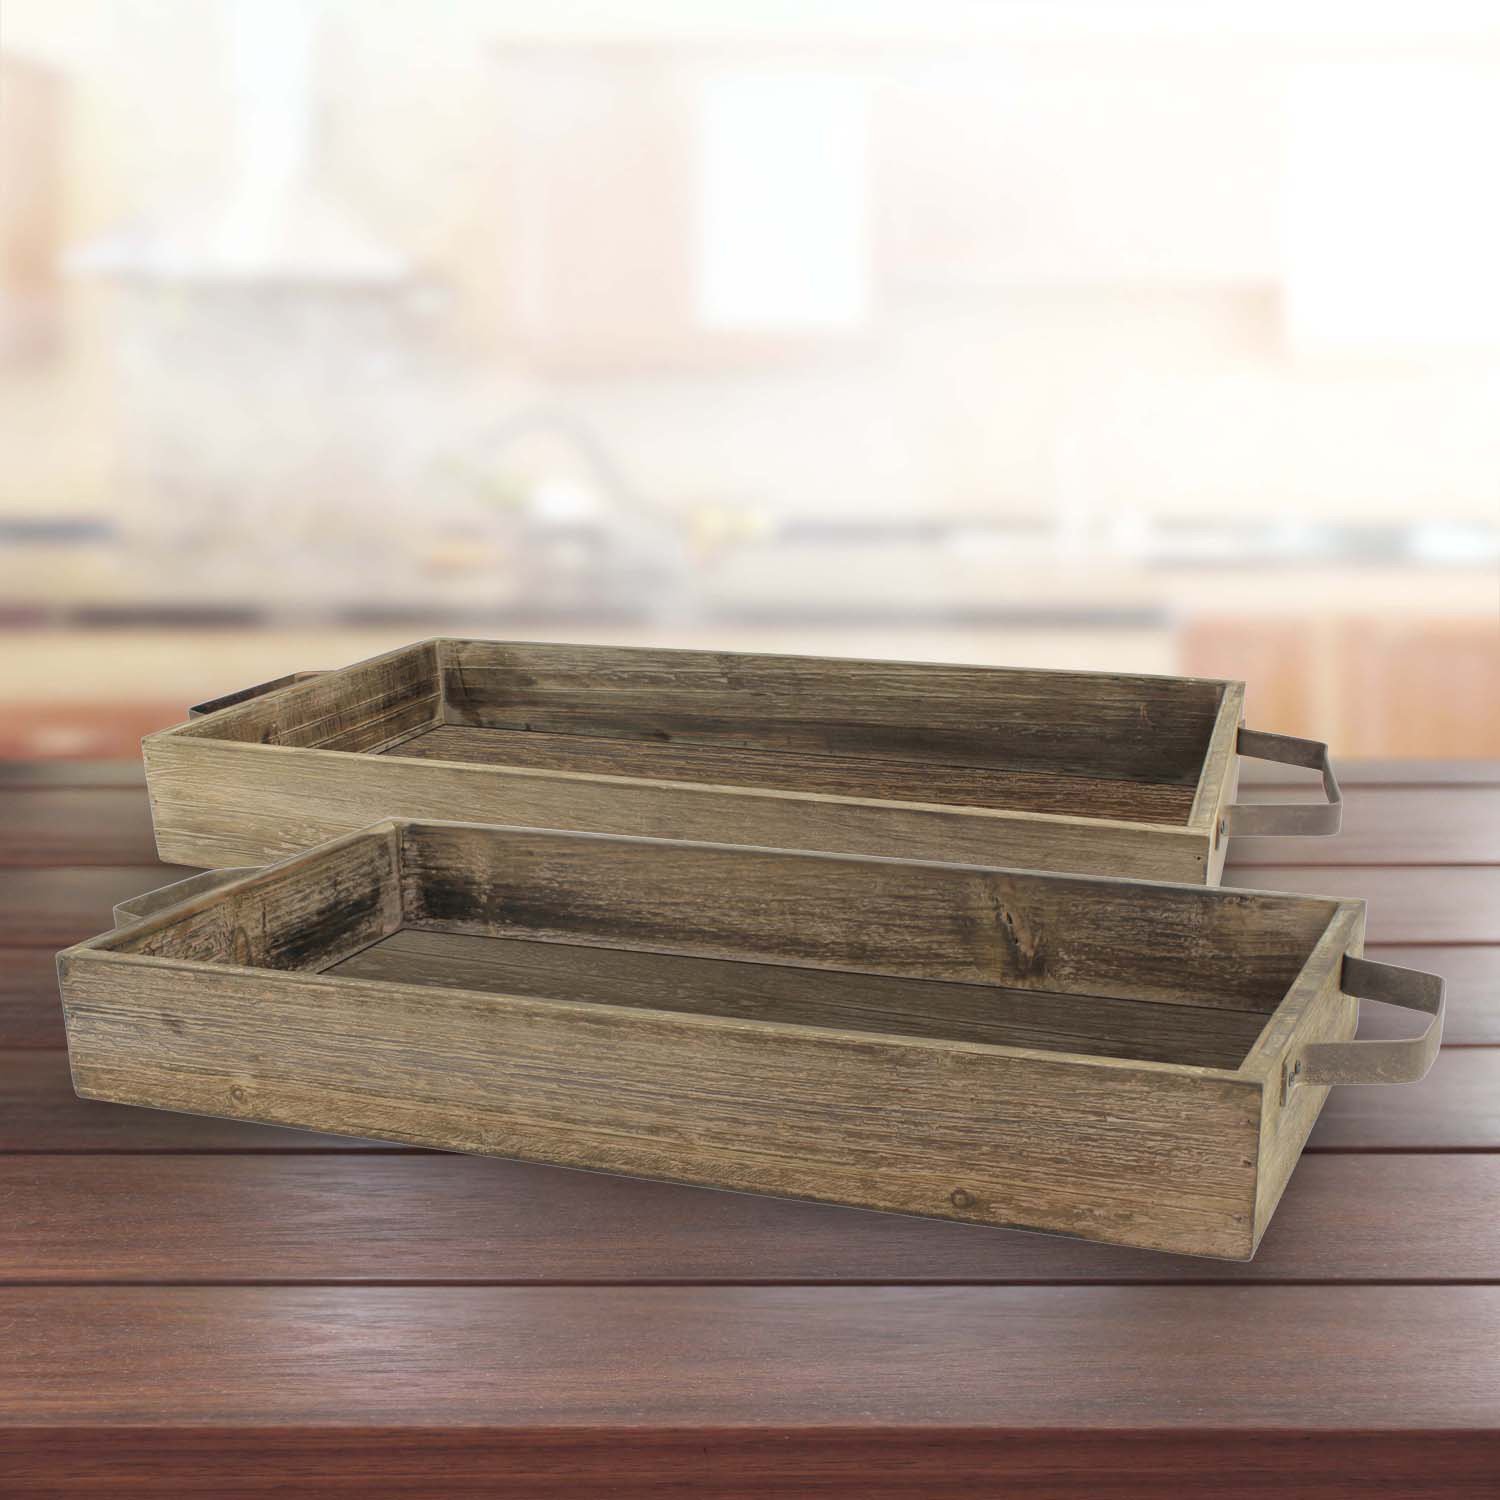 Stonebriar Nesting Wooden Rectangle Serving Tray Set with Metal Handles, Rustic Brown Wood Butler Trays, For Serving Food and Drink, a Unique Coffee Table Centerpiece, or Desk Organizer for Documents